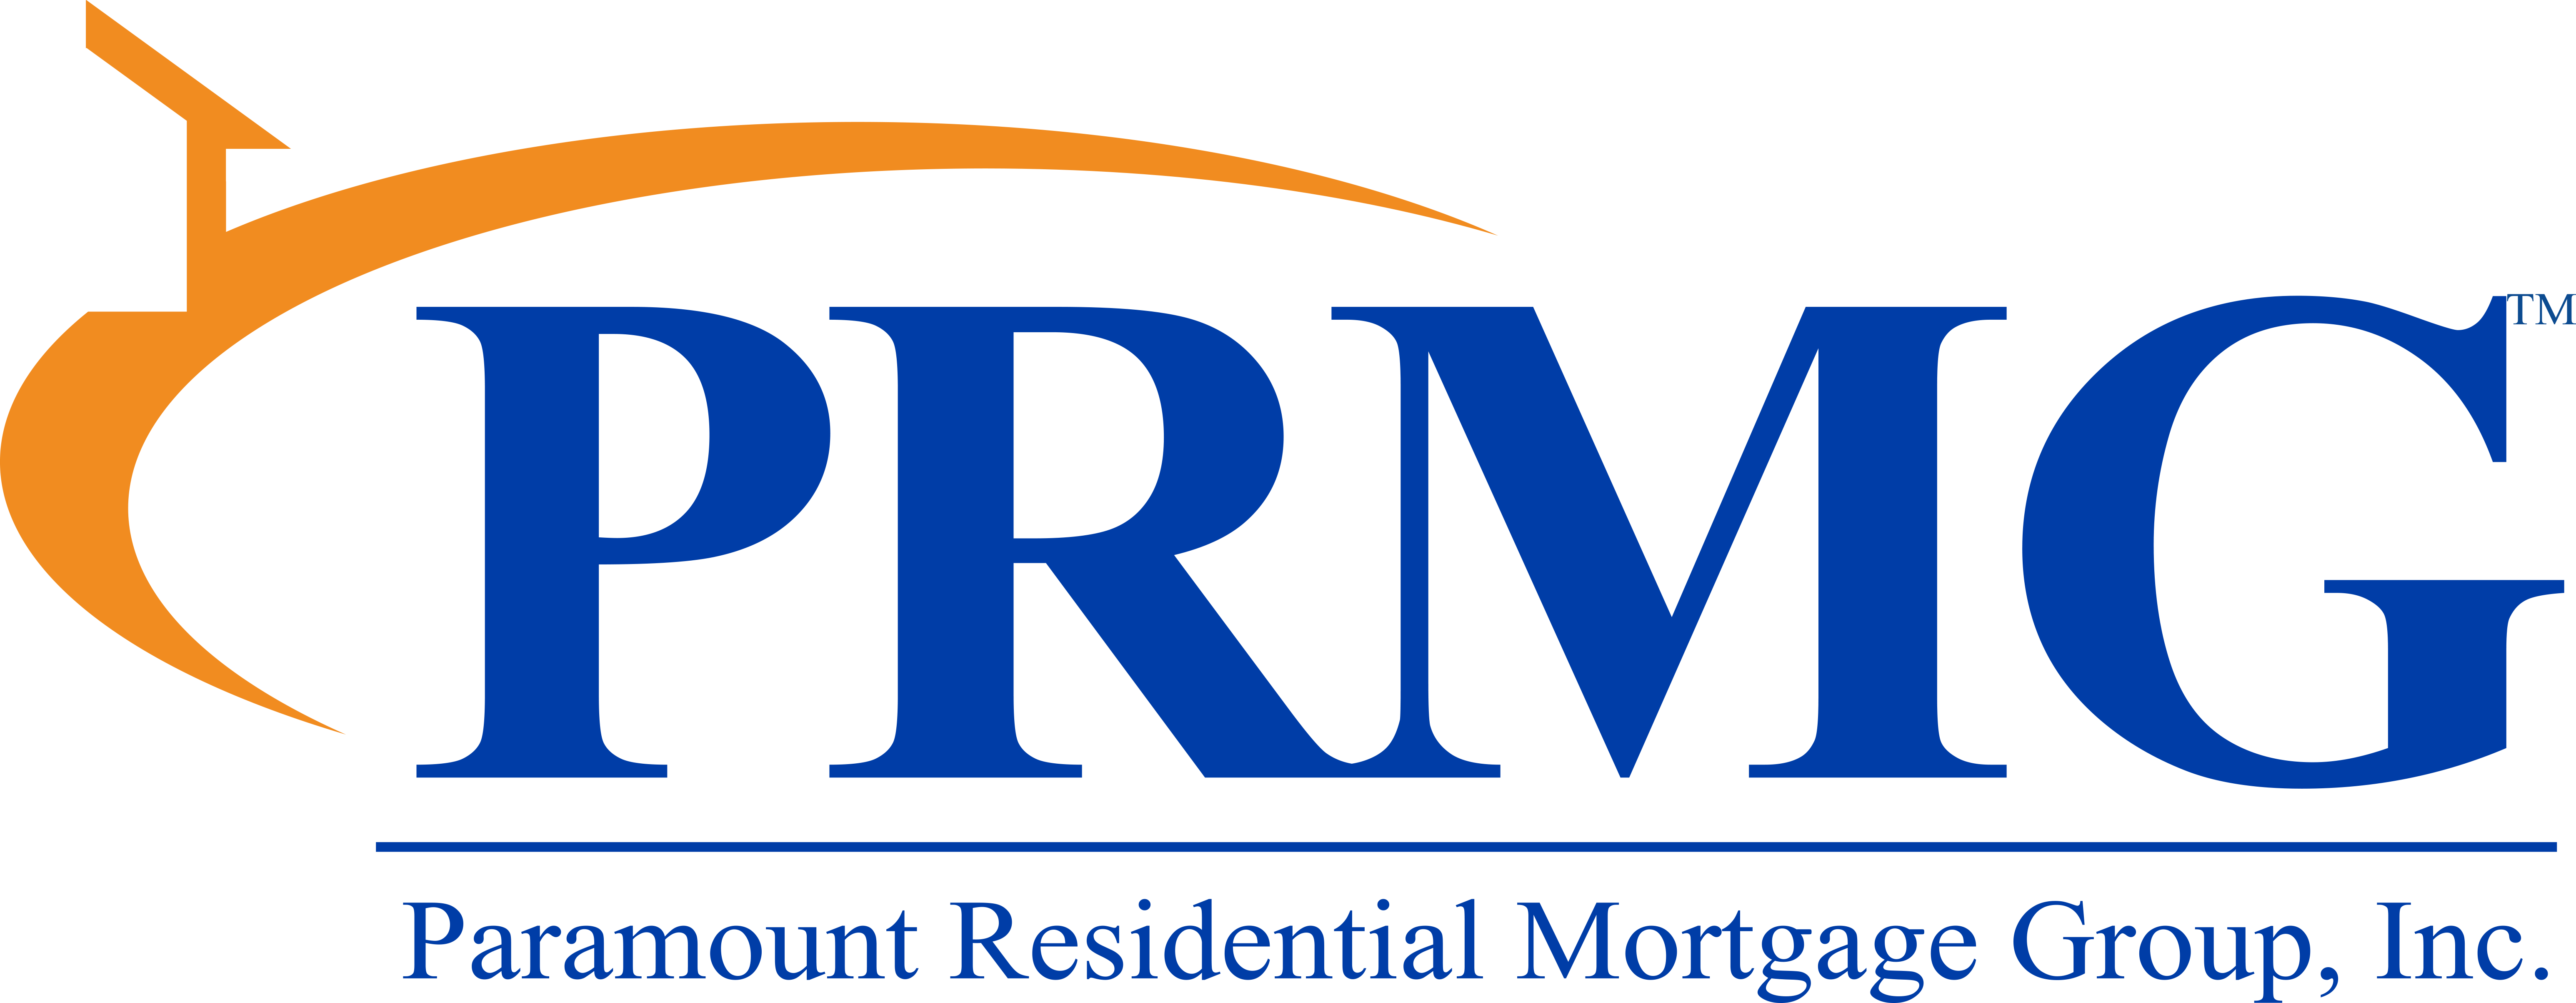 PRMG Logo Link to Home Page